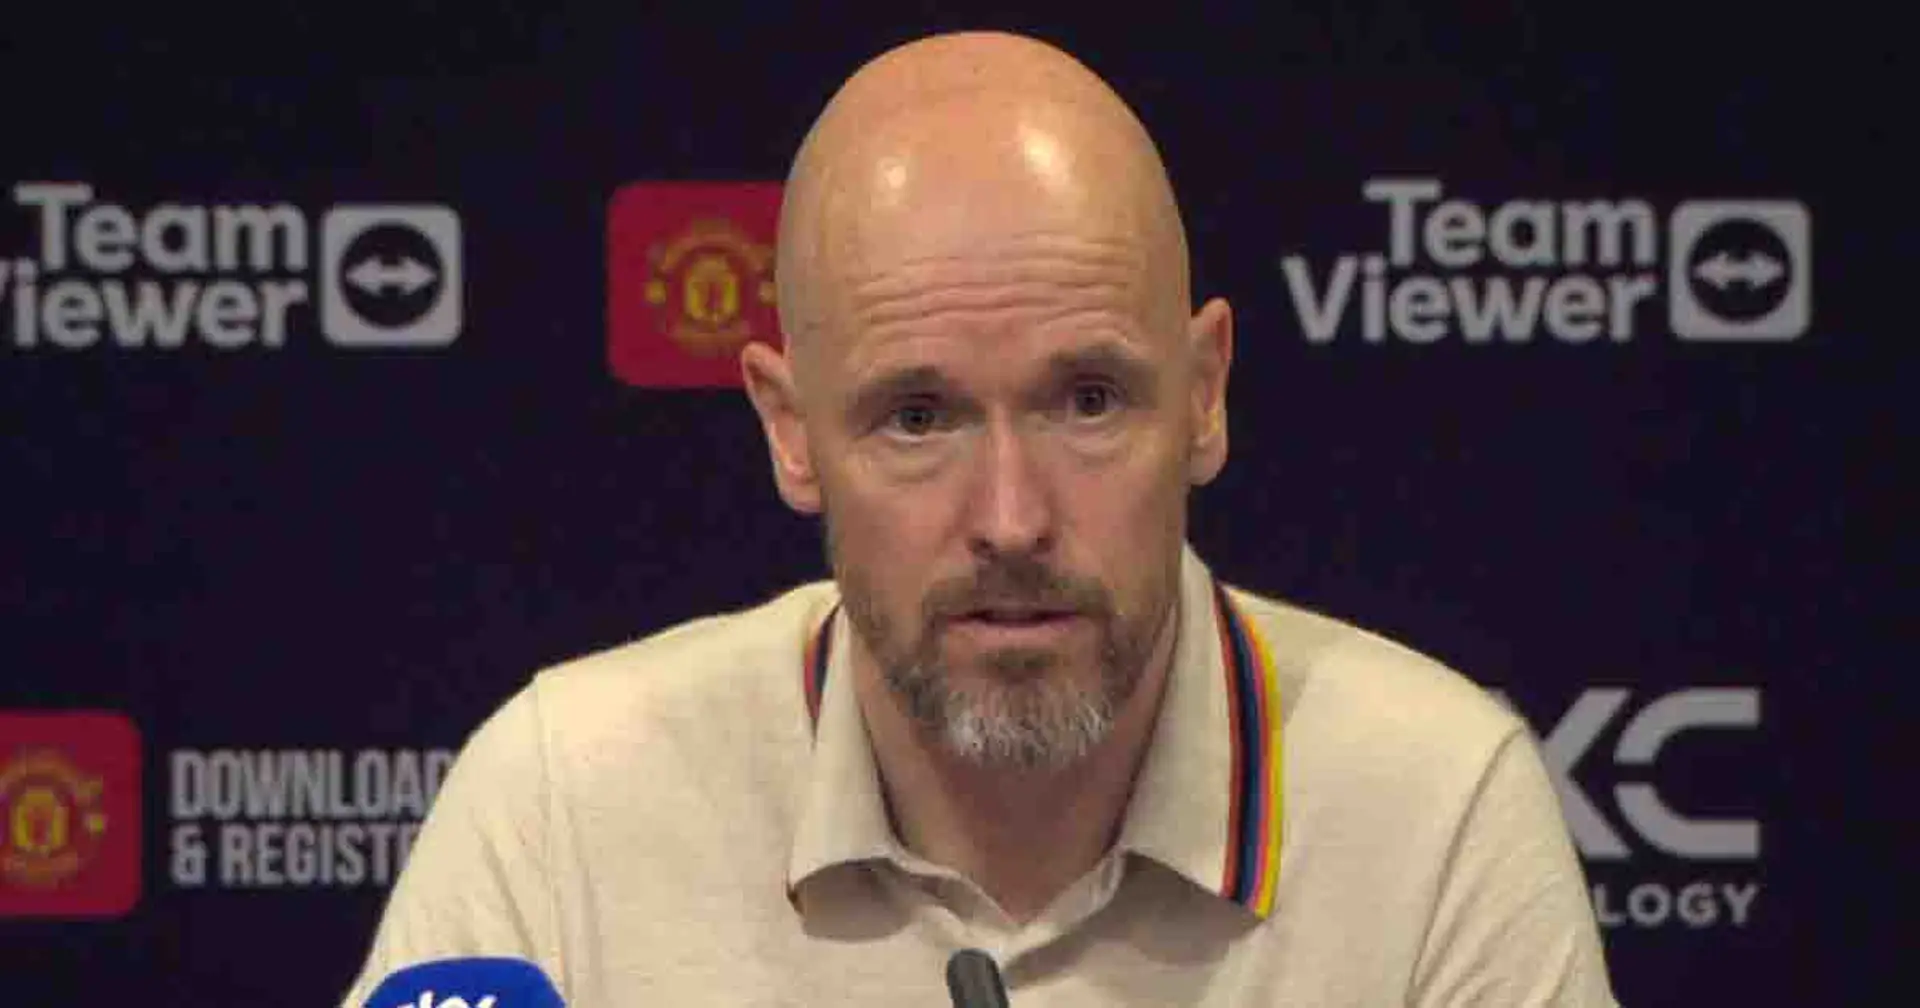 Could Newcastle United clash be Ten Hag's 'Old Trafford goodbye'? Erik answers